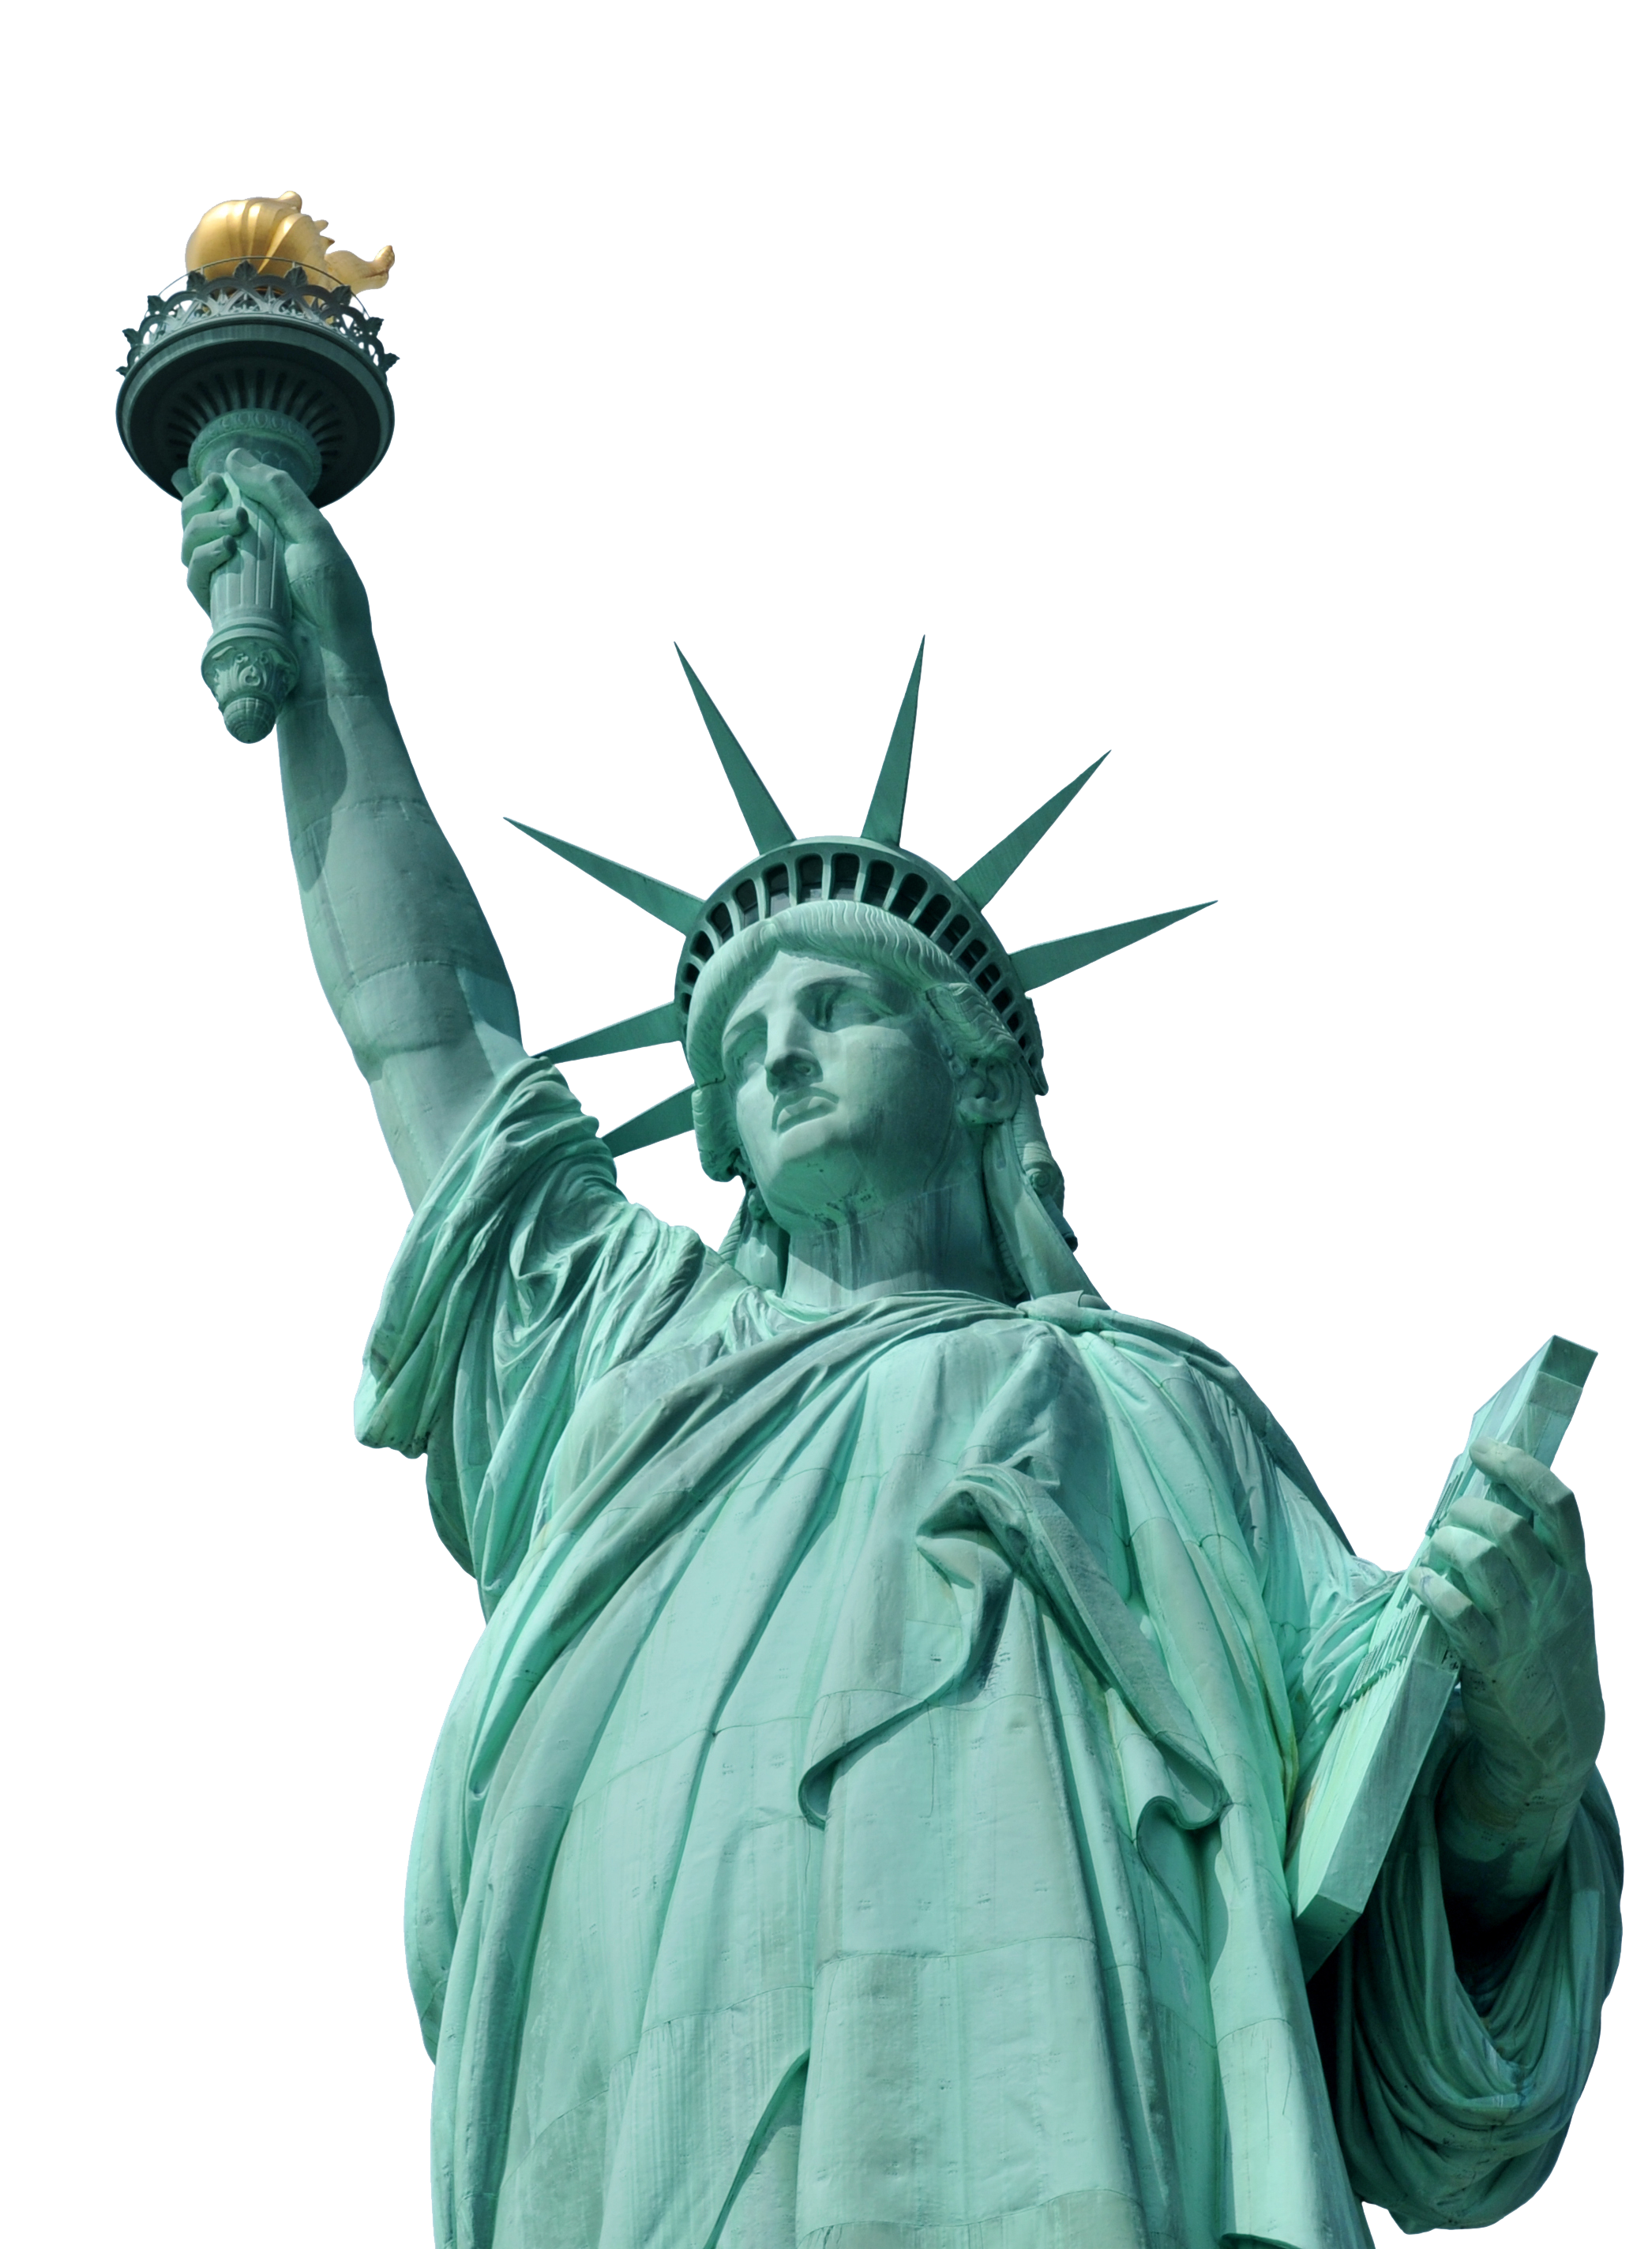 Download Statue Of Liberty Clipart HQ PNG Image.